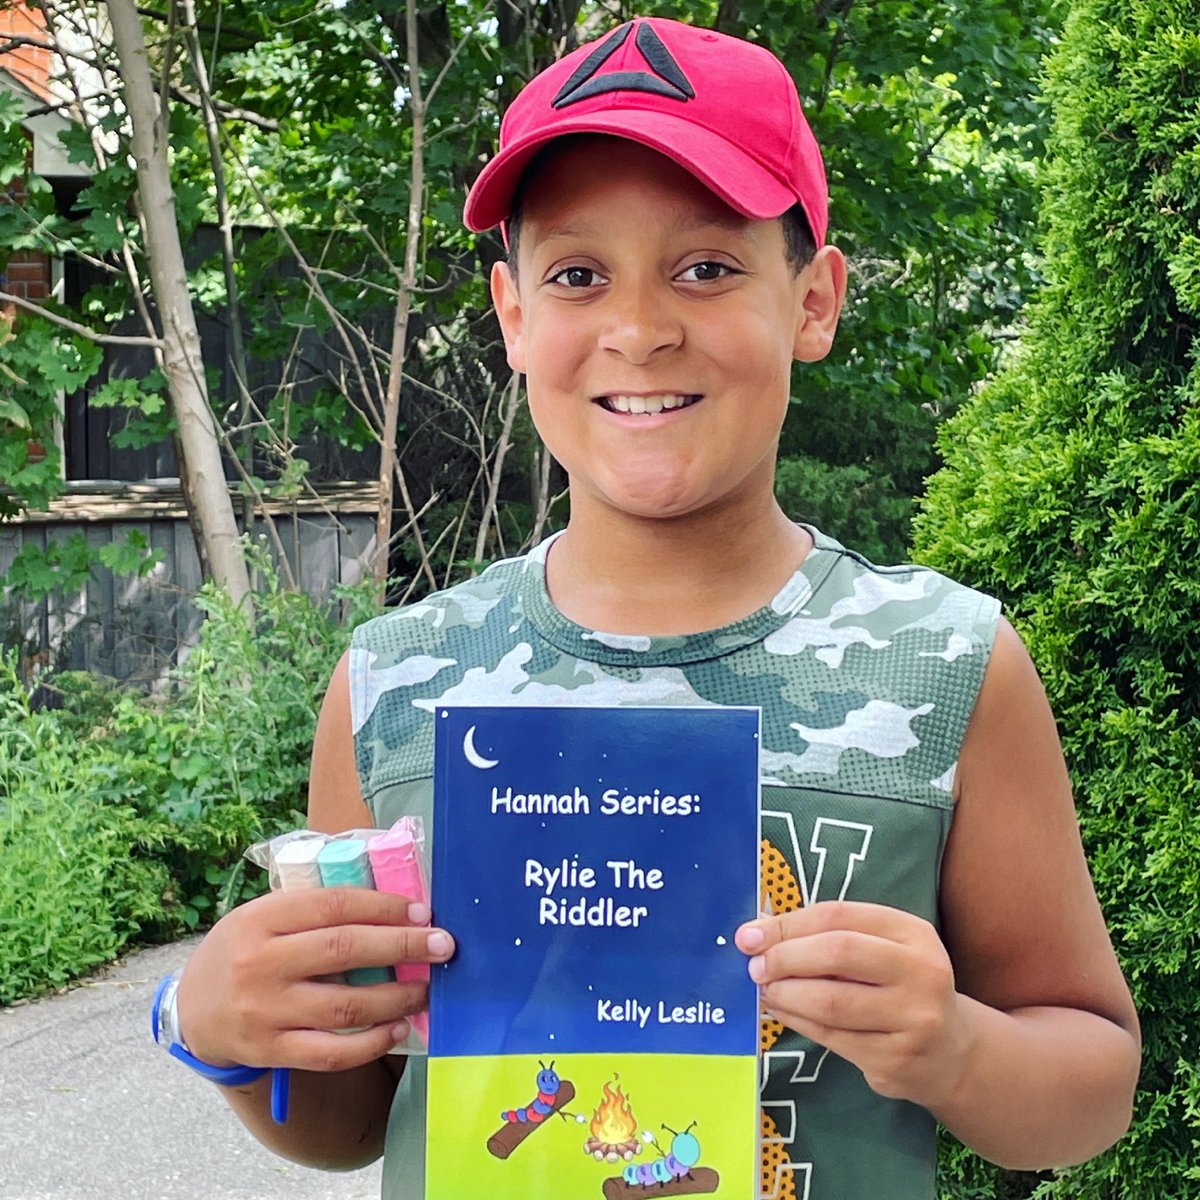 So happy to see kids reading Rylie The Riddler. (age 8) 

#bookaboutADHD #ADHD #adhdstrengths #adhdawareness #adhdsuperpowers #differences #acceptance #kindness #inclusion #thehannahseriesKL #kidlit #youngreaders #summerreading #endthestigma #inclusion1bookatatime